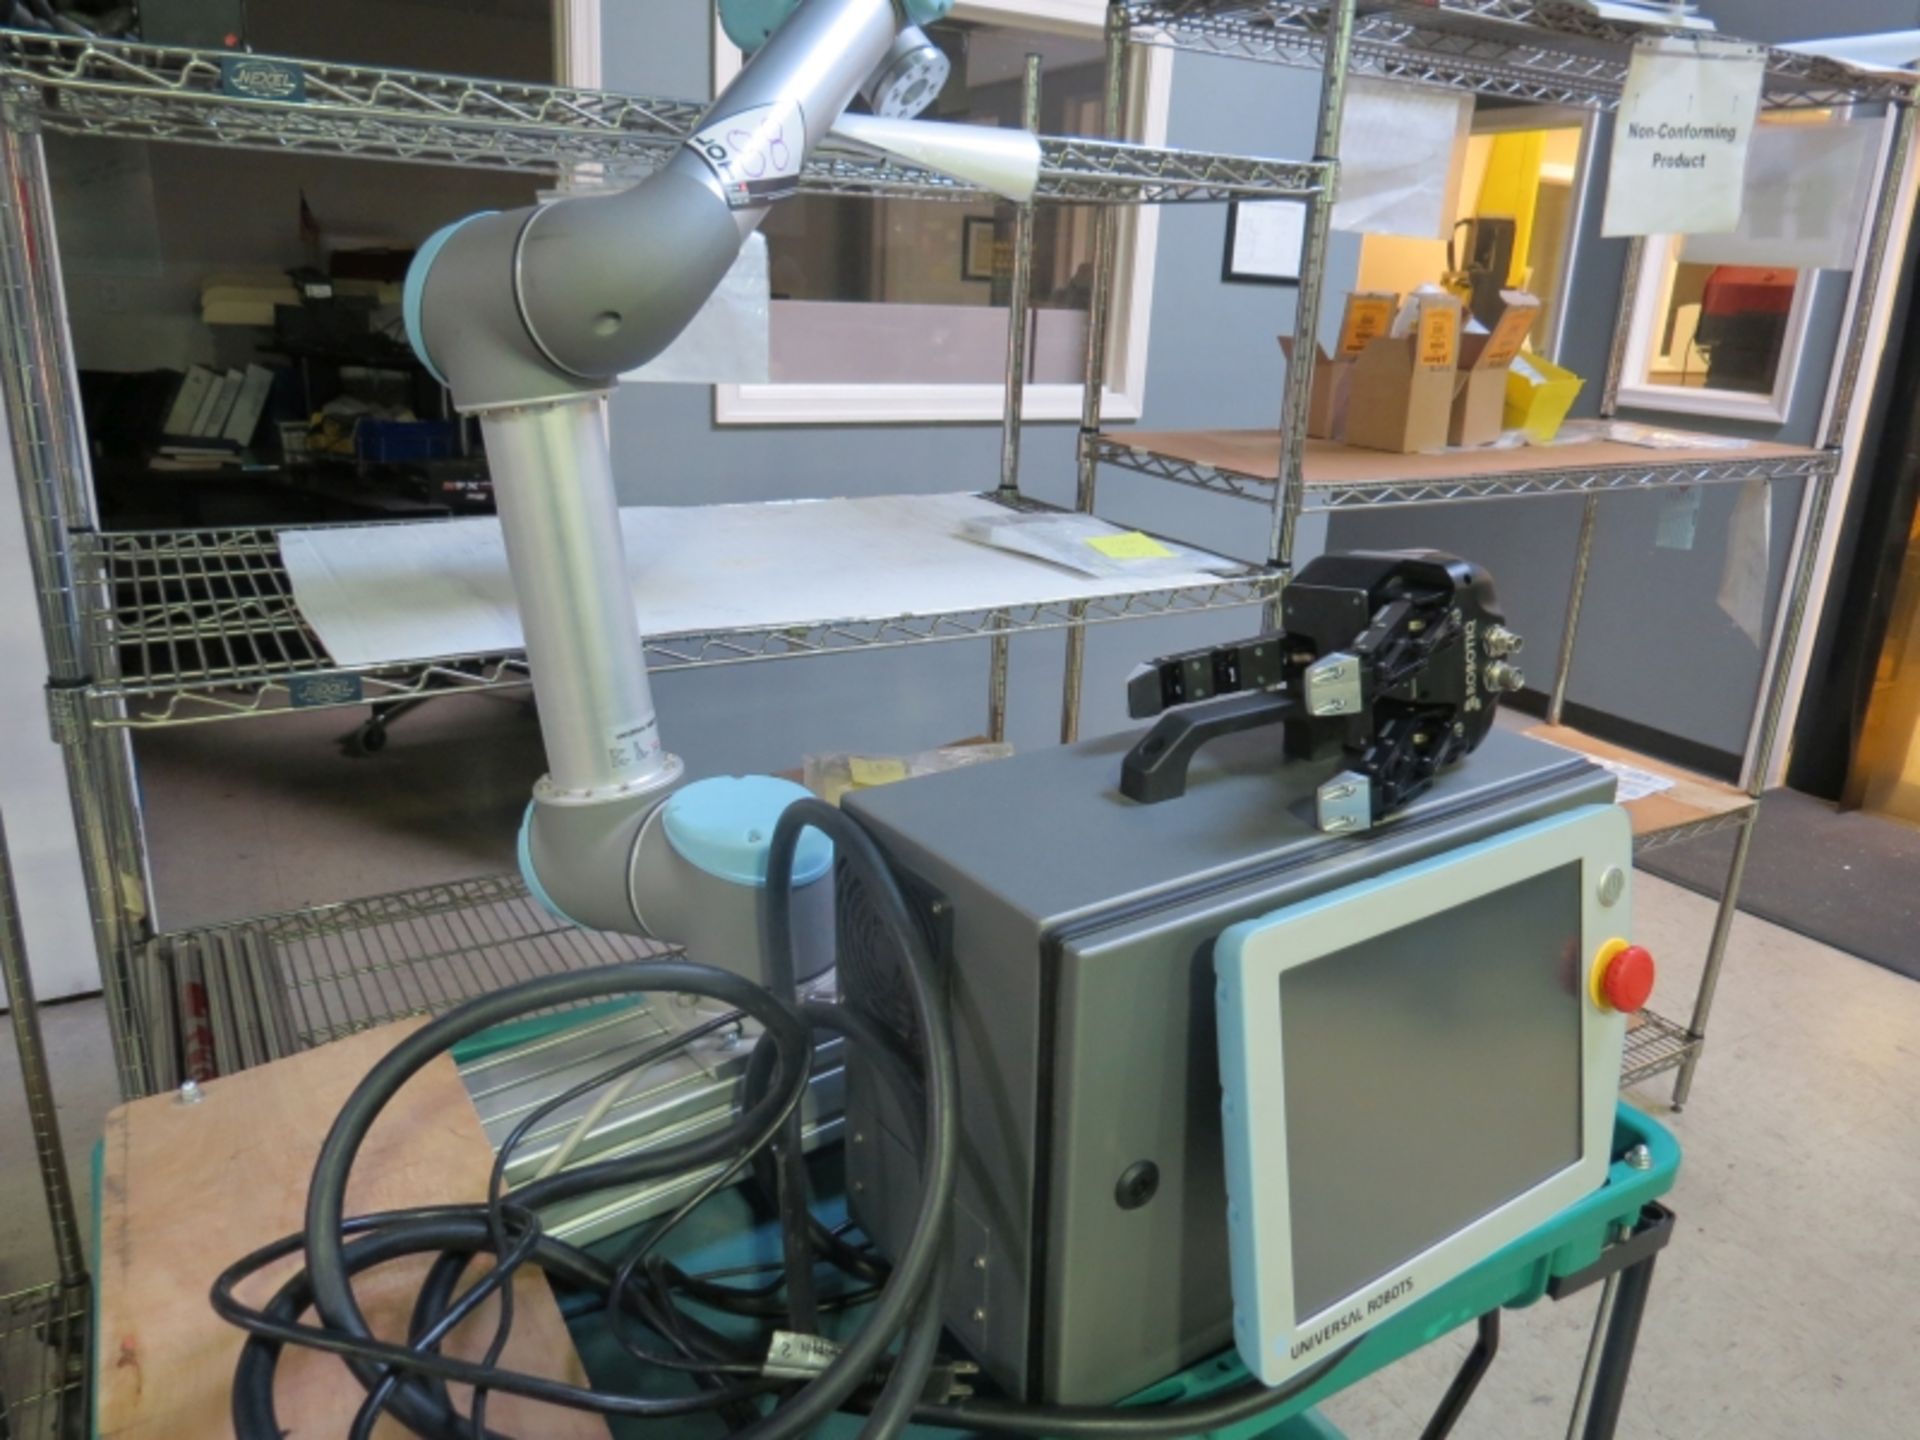 Universal Robots with Gripper Arm UR5 Max Payload 5KG *Over $40,000 new* *NEVER USED FOR PRODUCTION* - Image 6 of 6